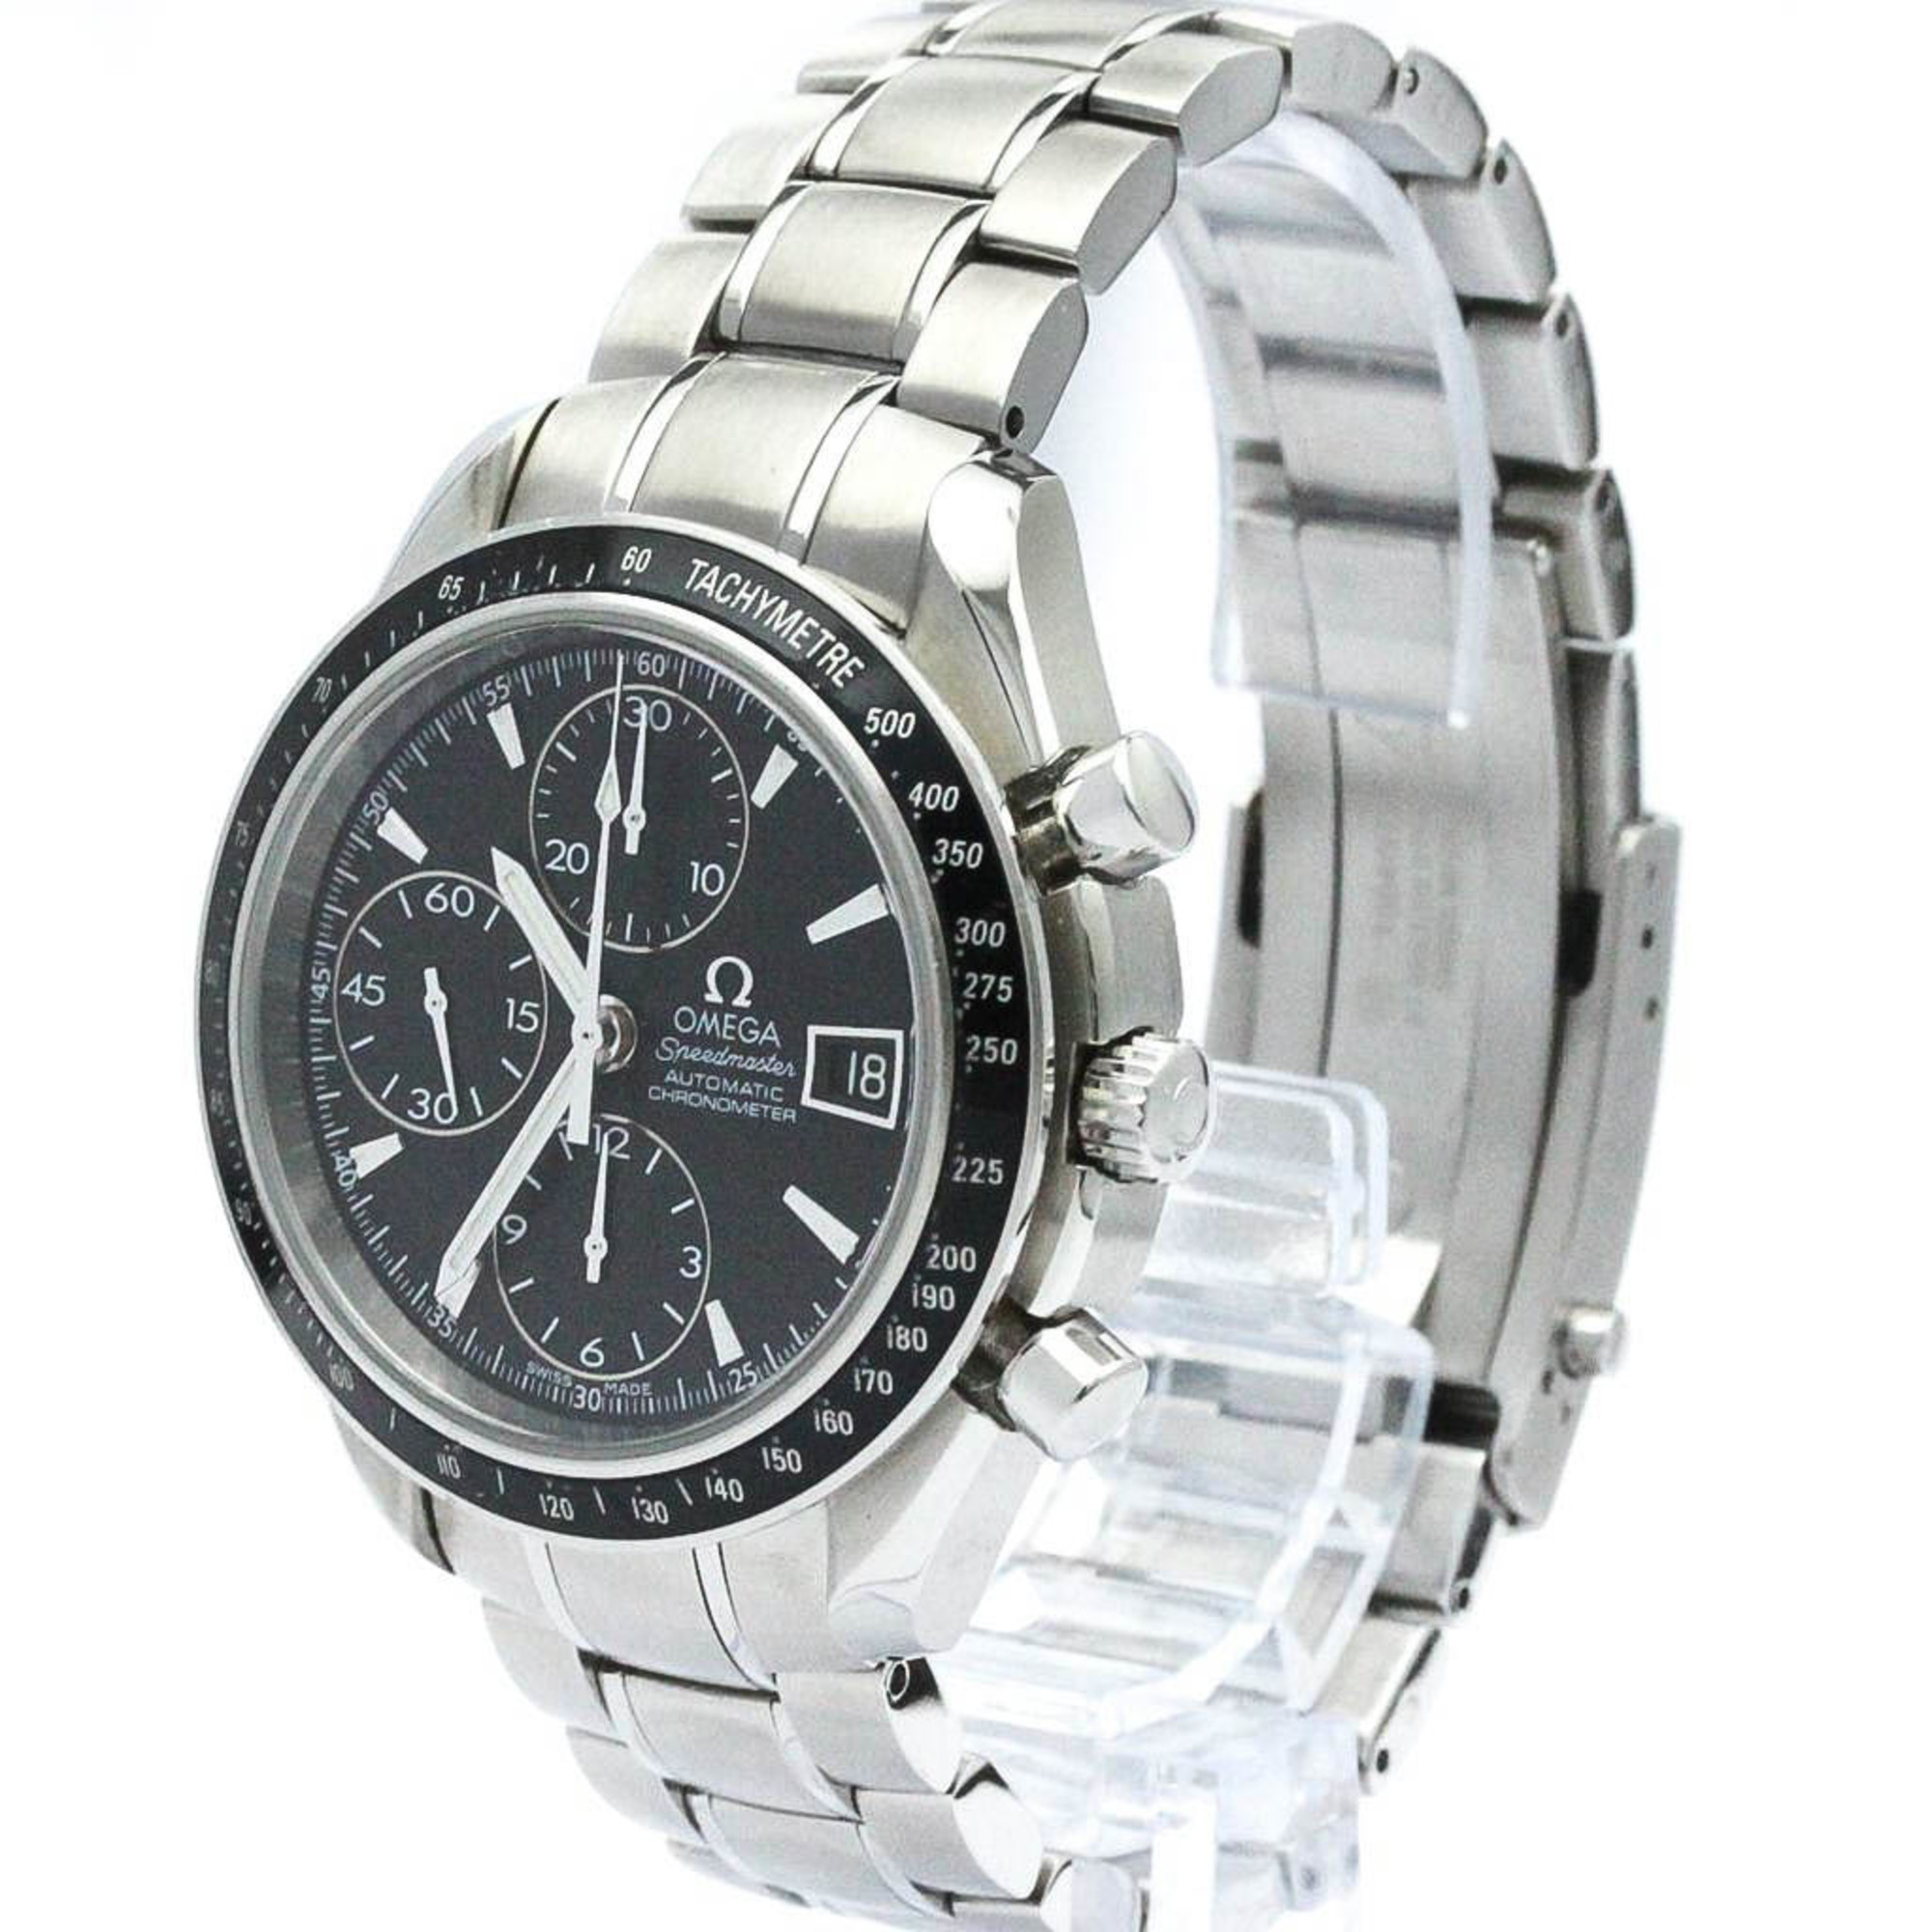 Polished OMEGA Speedmaster Date Steel Automatic Mens Watch 3210.50 BF571668